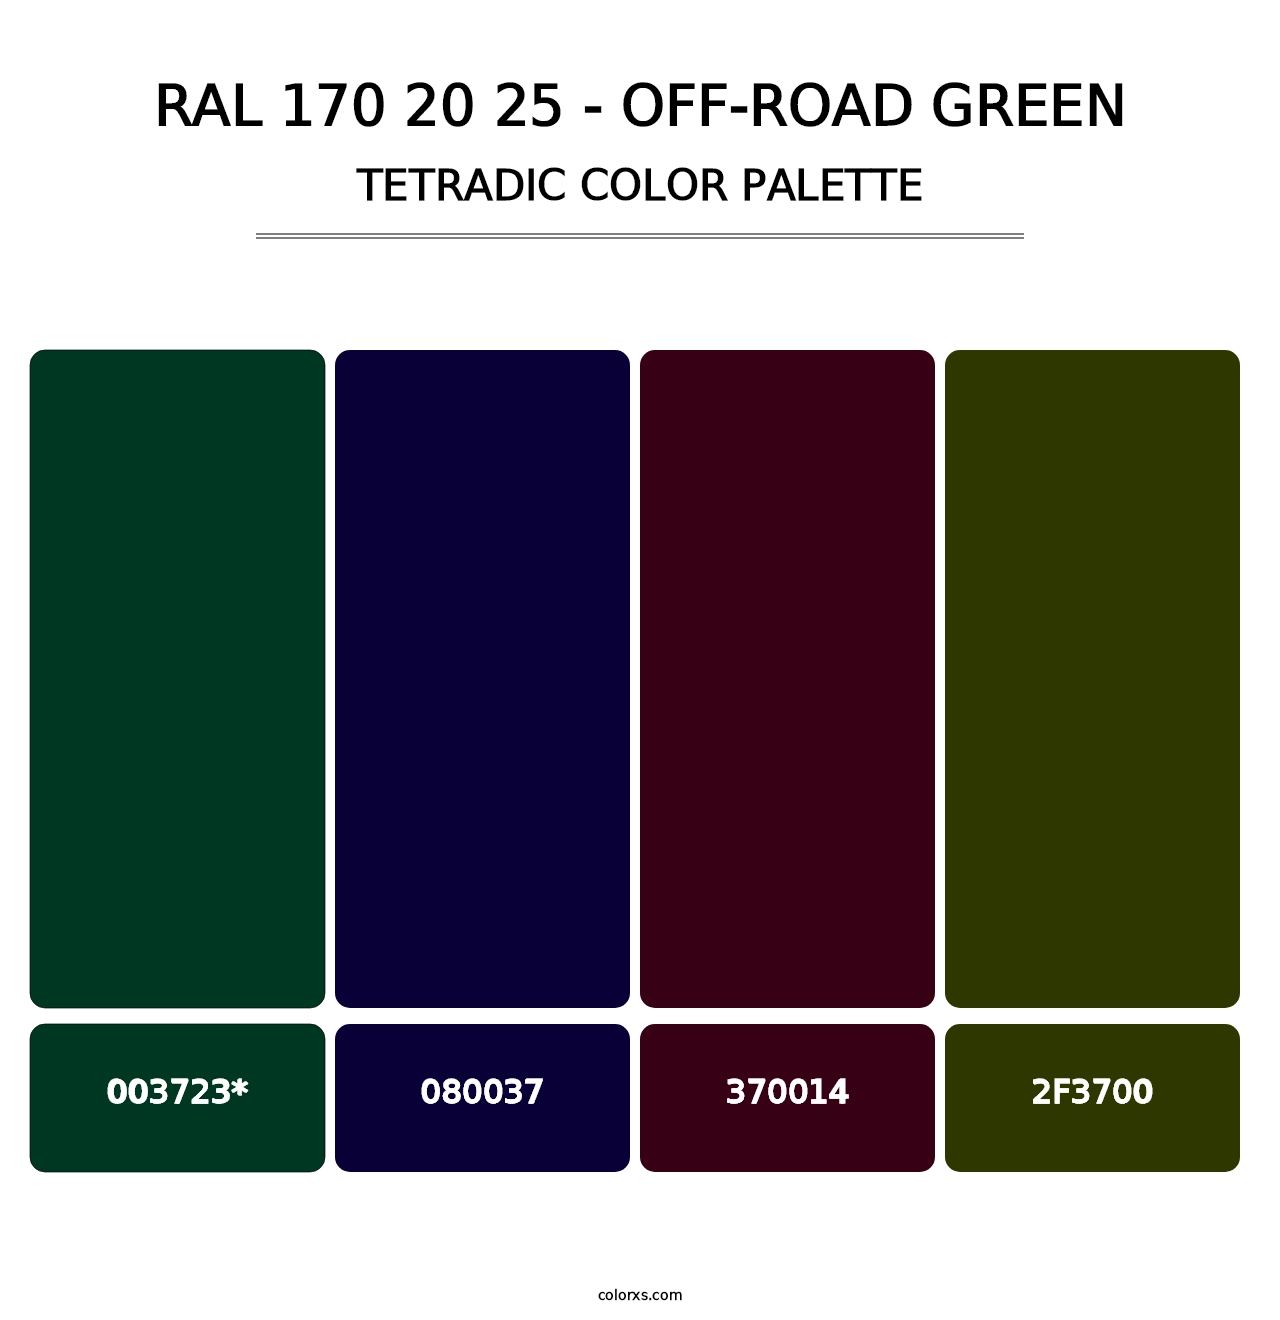 RAL 170 20 25 - Off-Road Green - Tetradic Color Palette